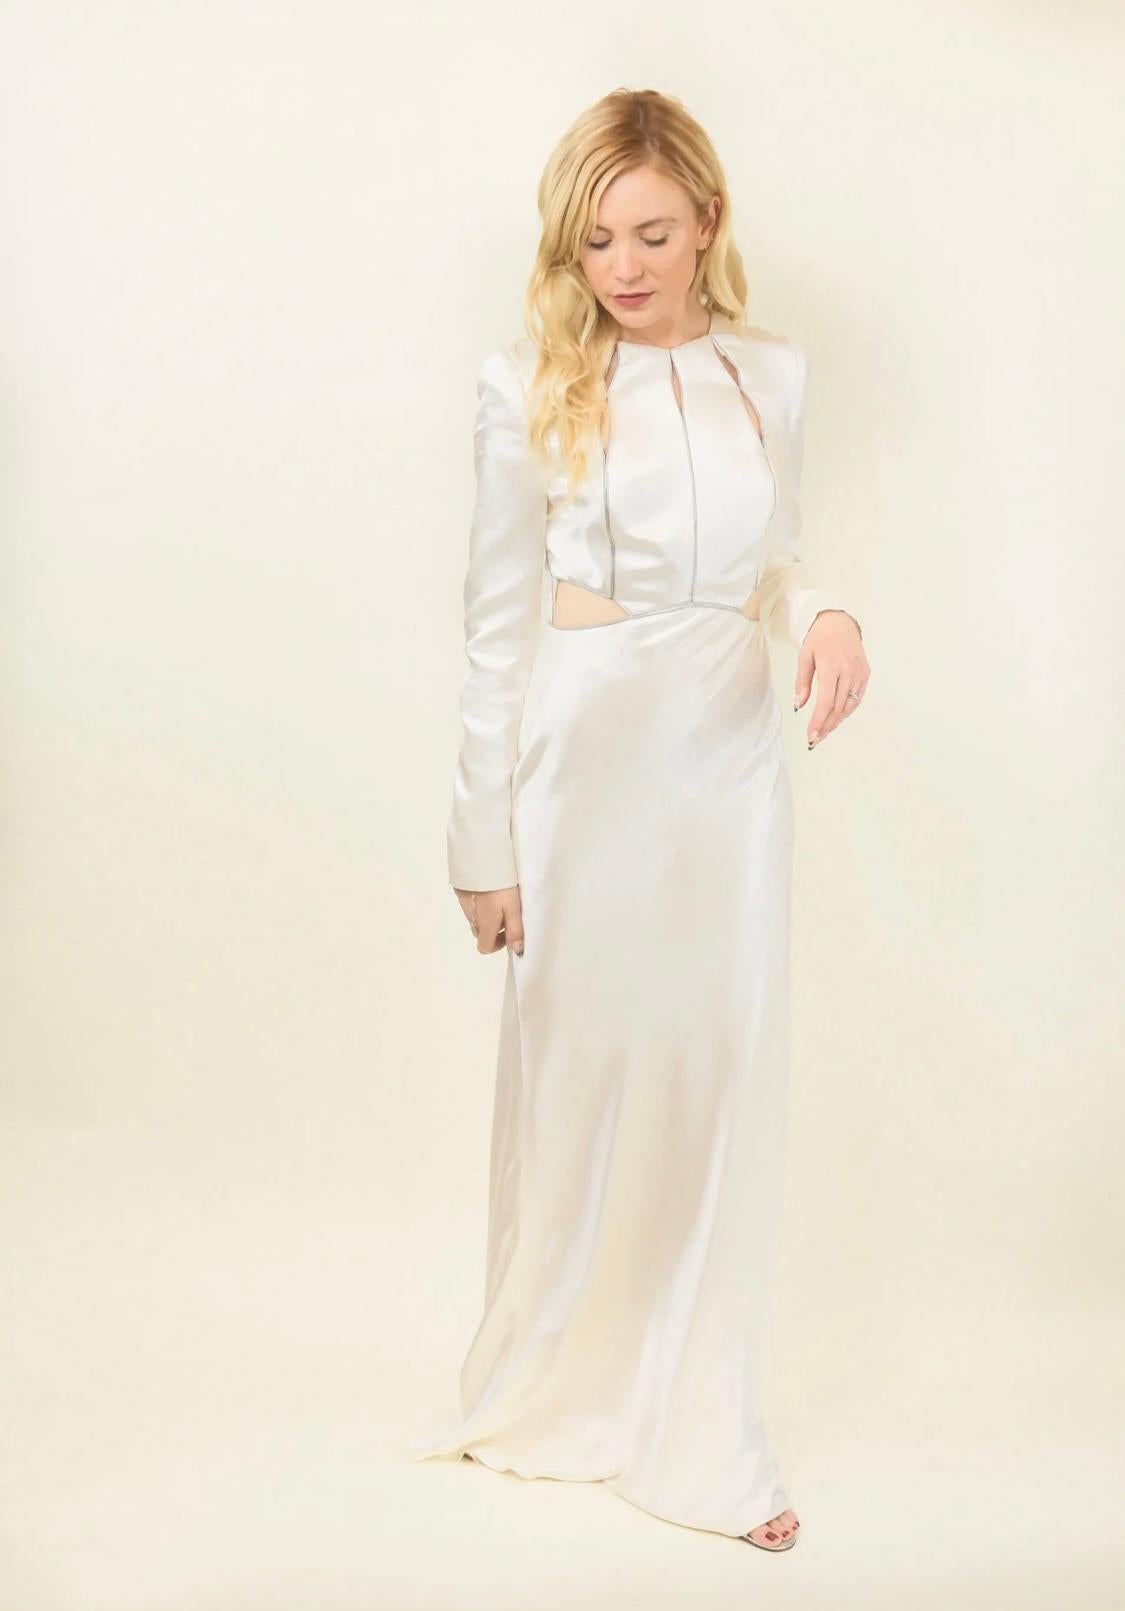 Finding a vintage designer white gown is in itself a difficult task.  Our white gown with waist cut outs is from iconic designer, Alexander McQueen. This is truly one of a kind. From the pre fall 2014 collection, it has cut outs at the waist and